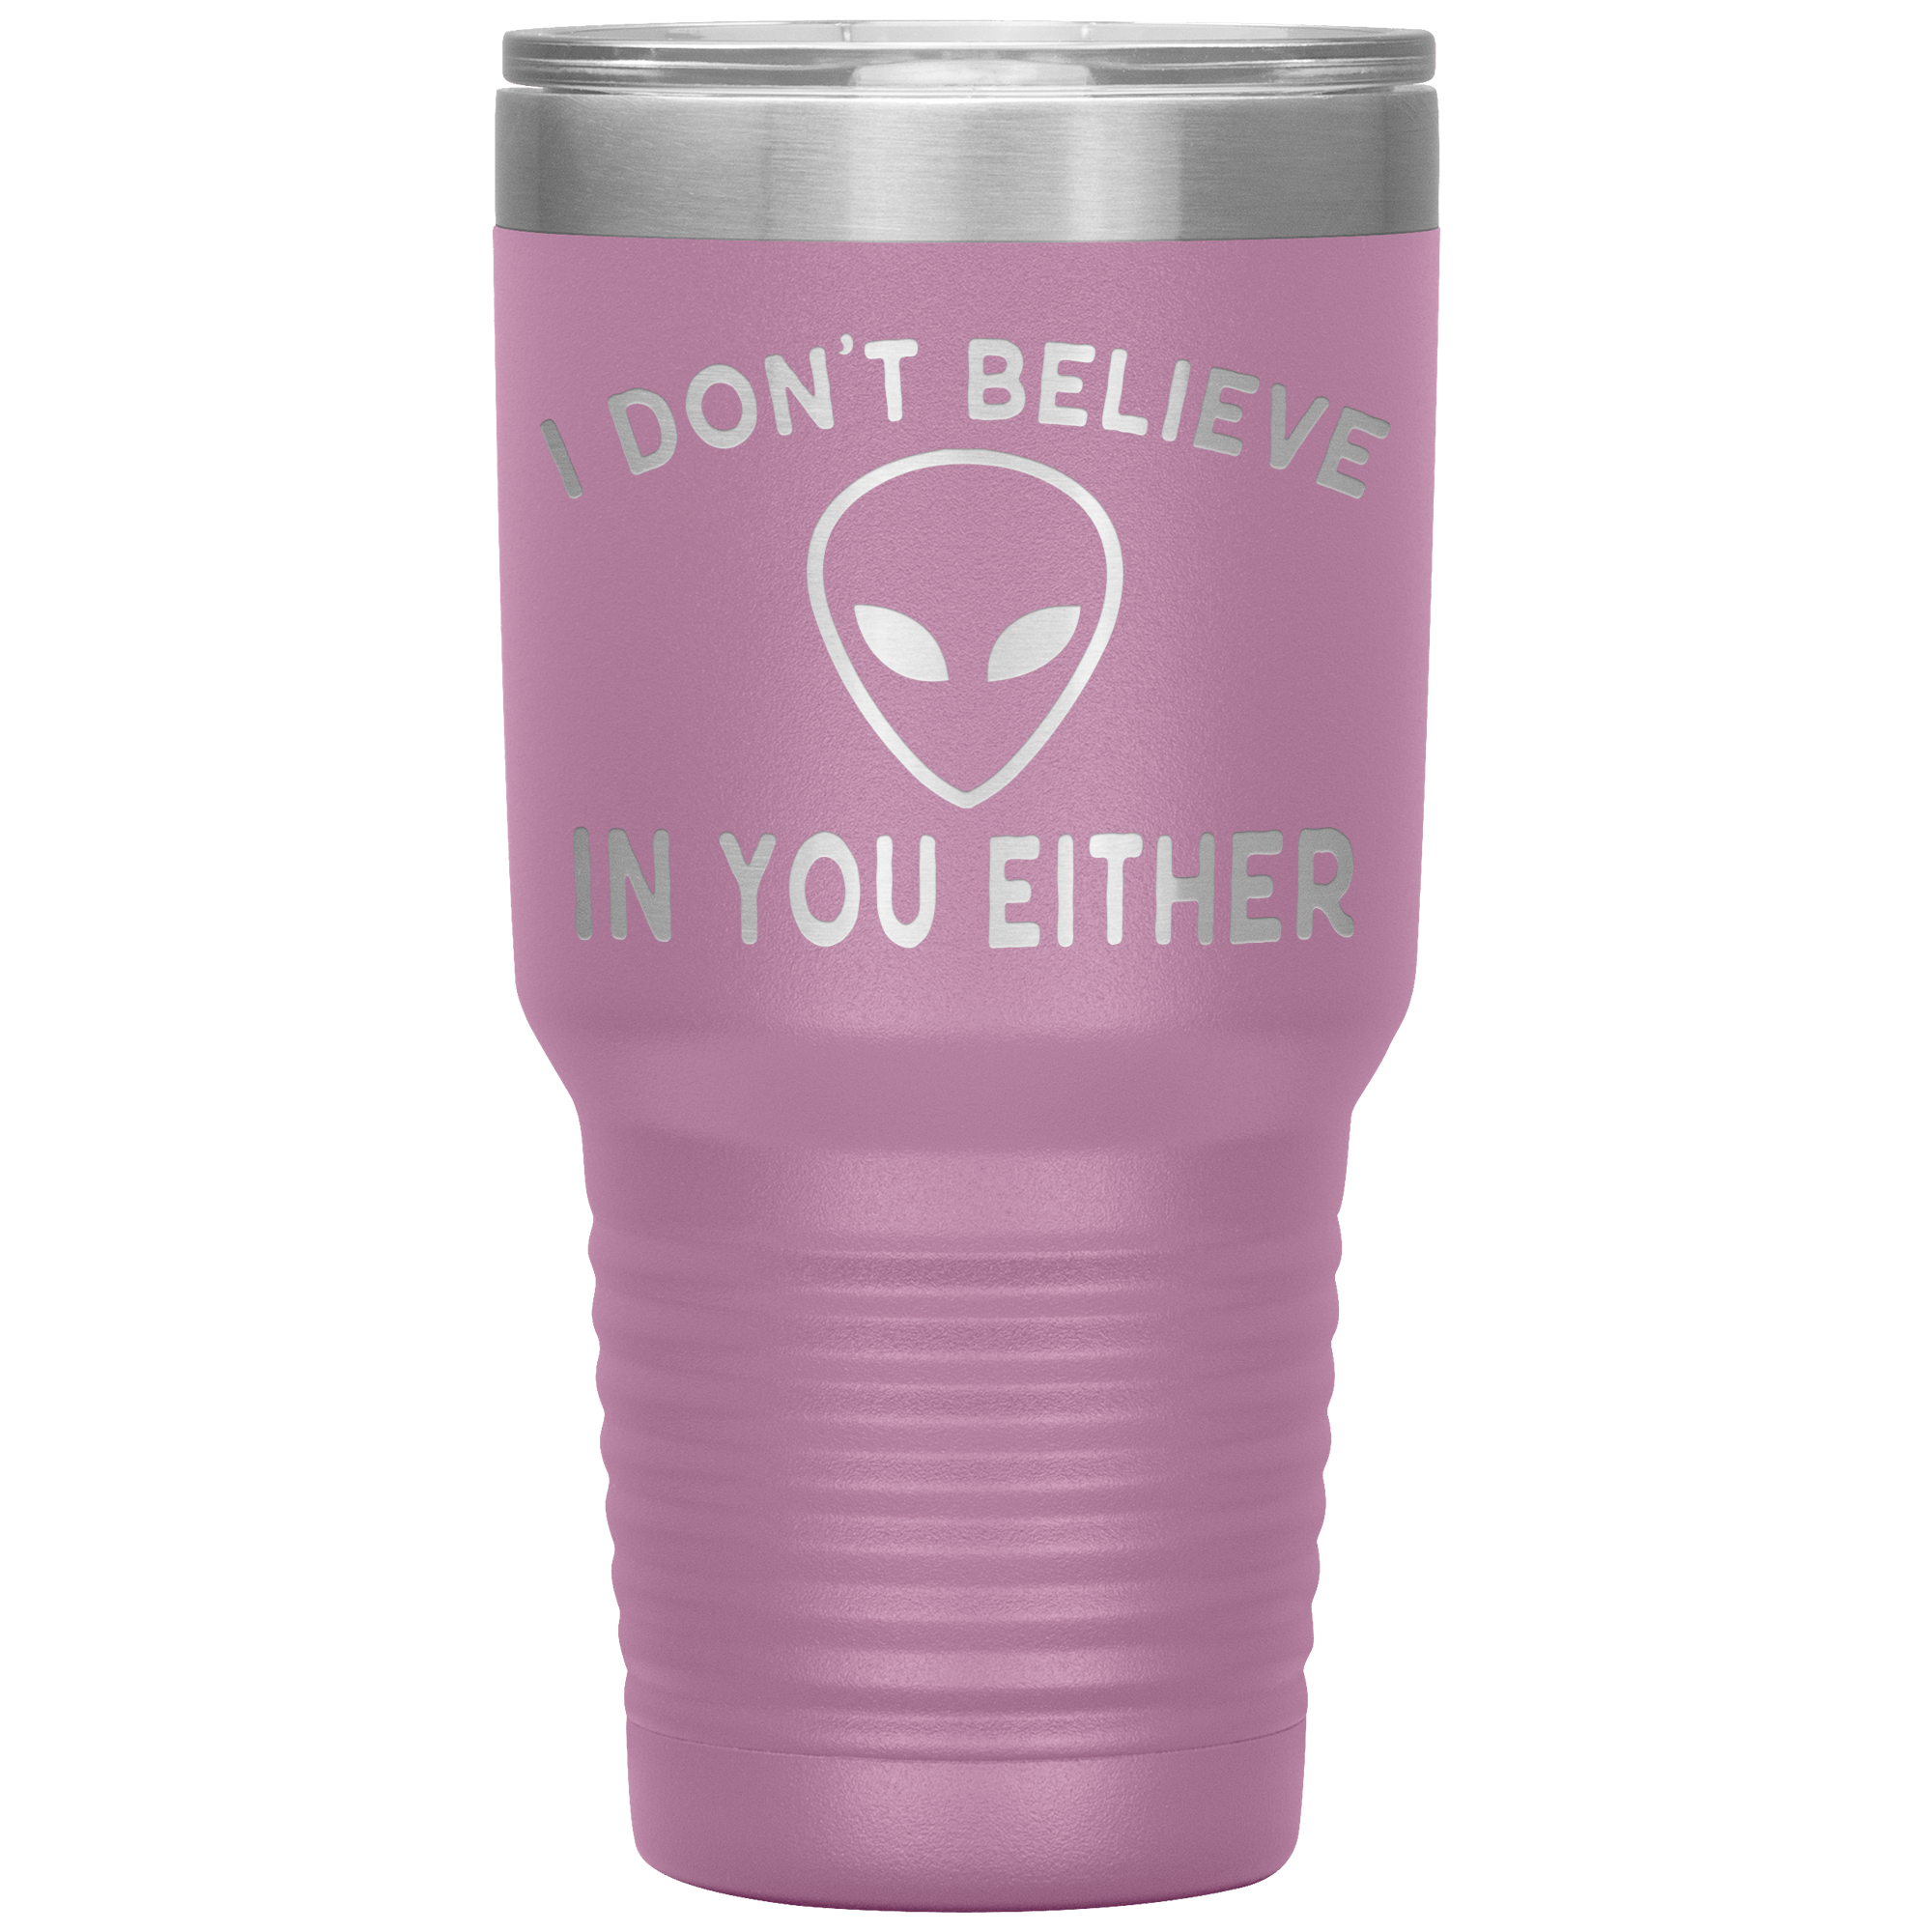 I DON'T BELIEVE IN YOU EITHER - TUMBLER